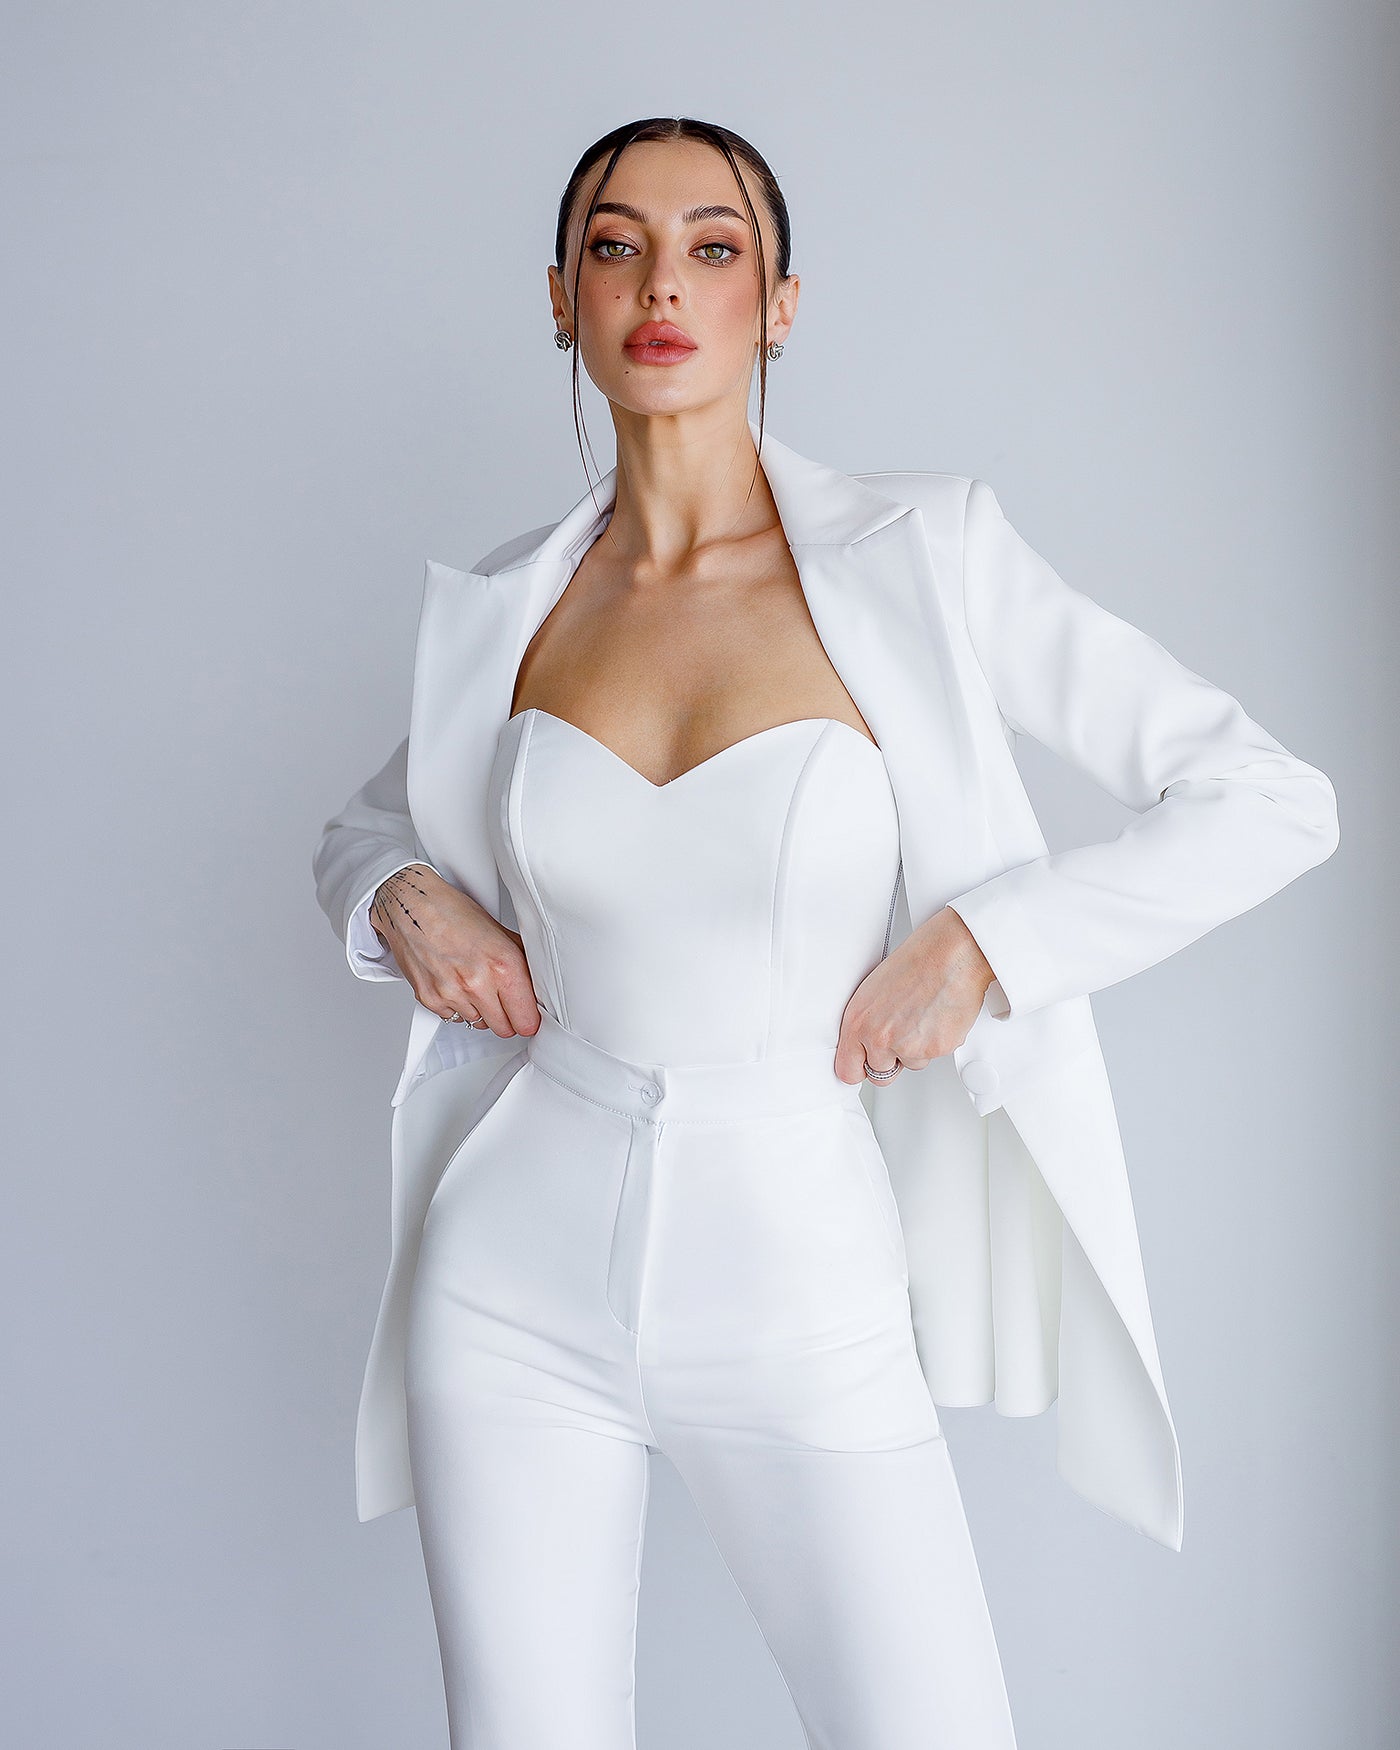 White Single-Breasted Suit 2-Piece (article 421)